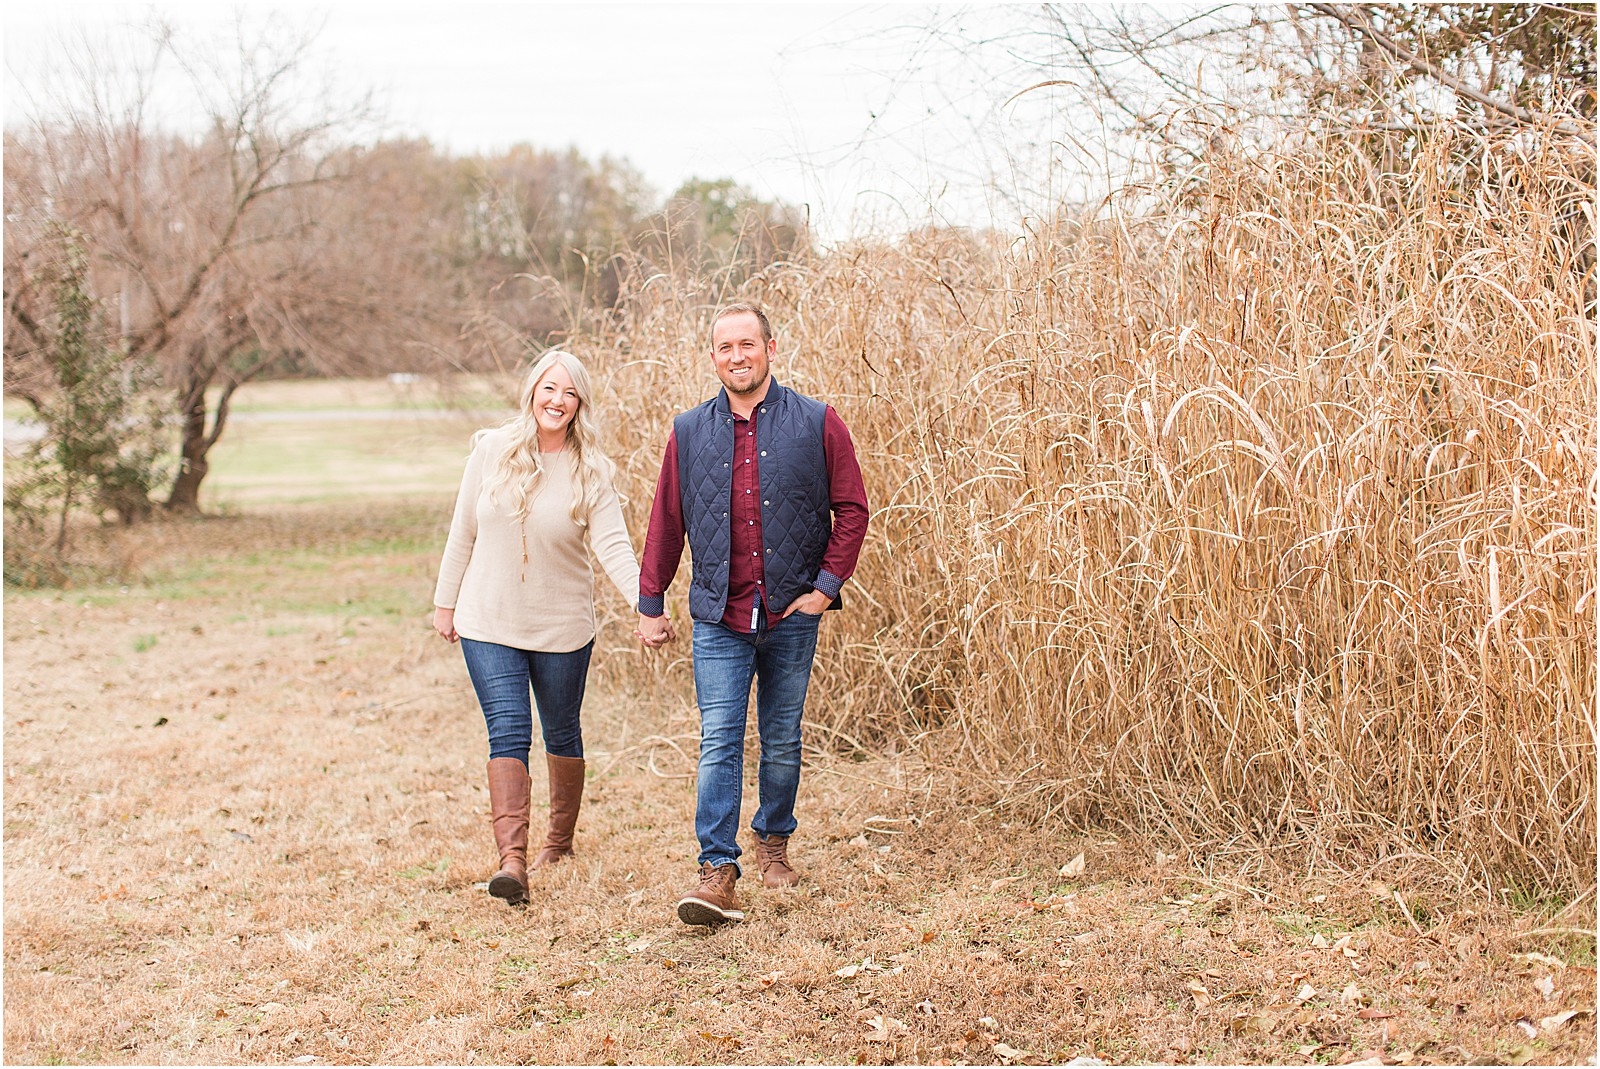 A Perfect Fall Engagement Session at Evansville State Park | Jamie and Max | Bret and Brandie Photography 011.jpg